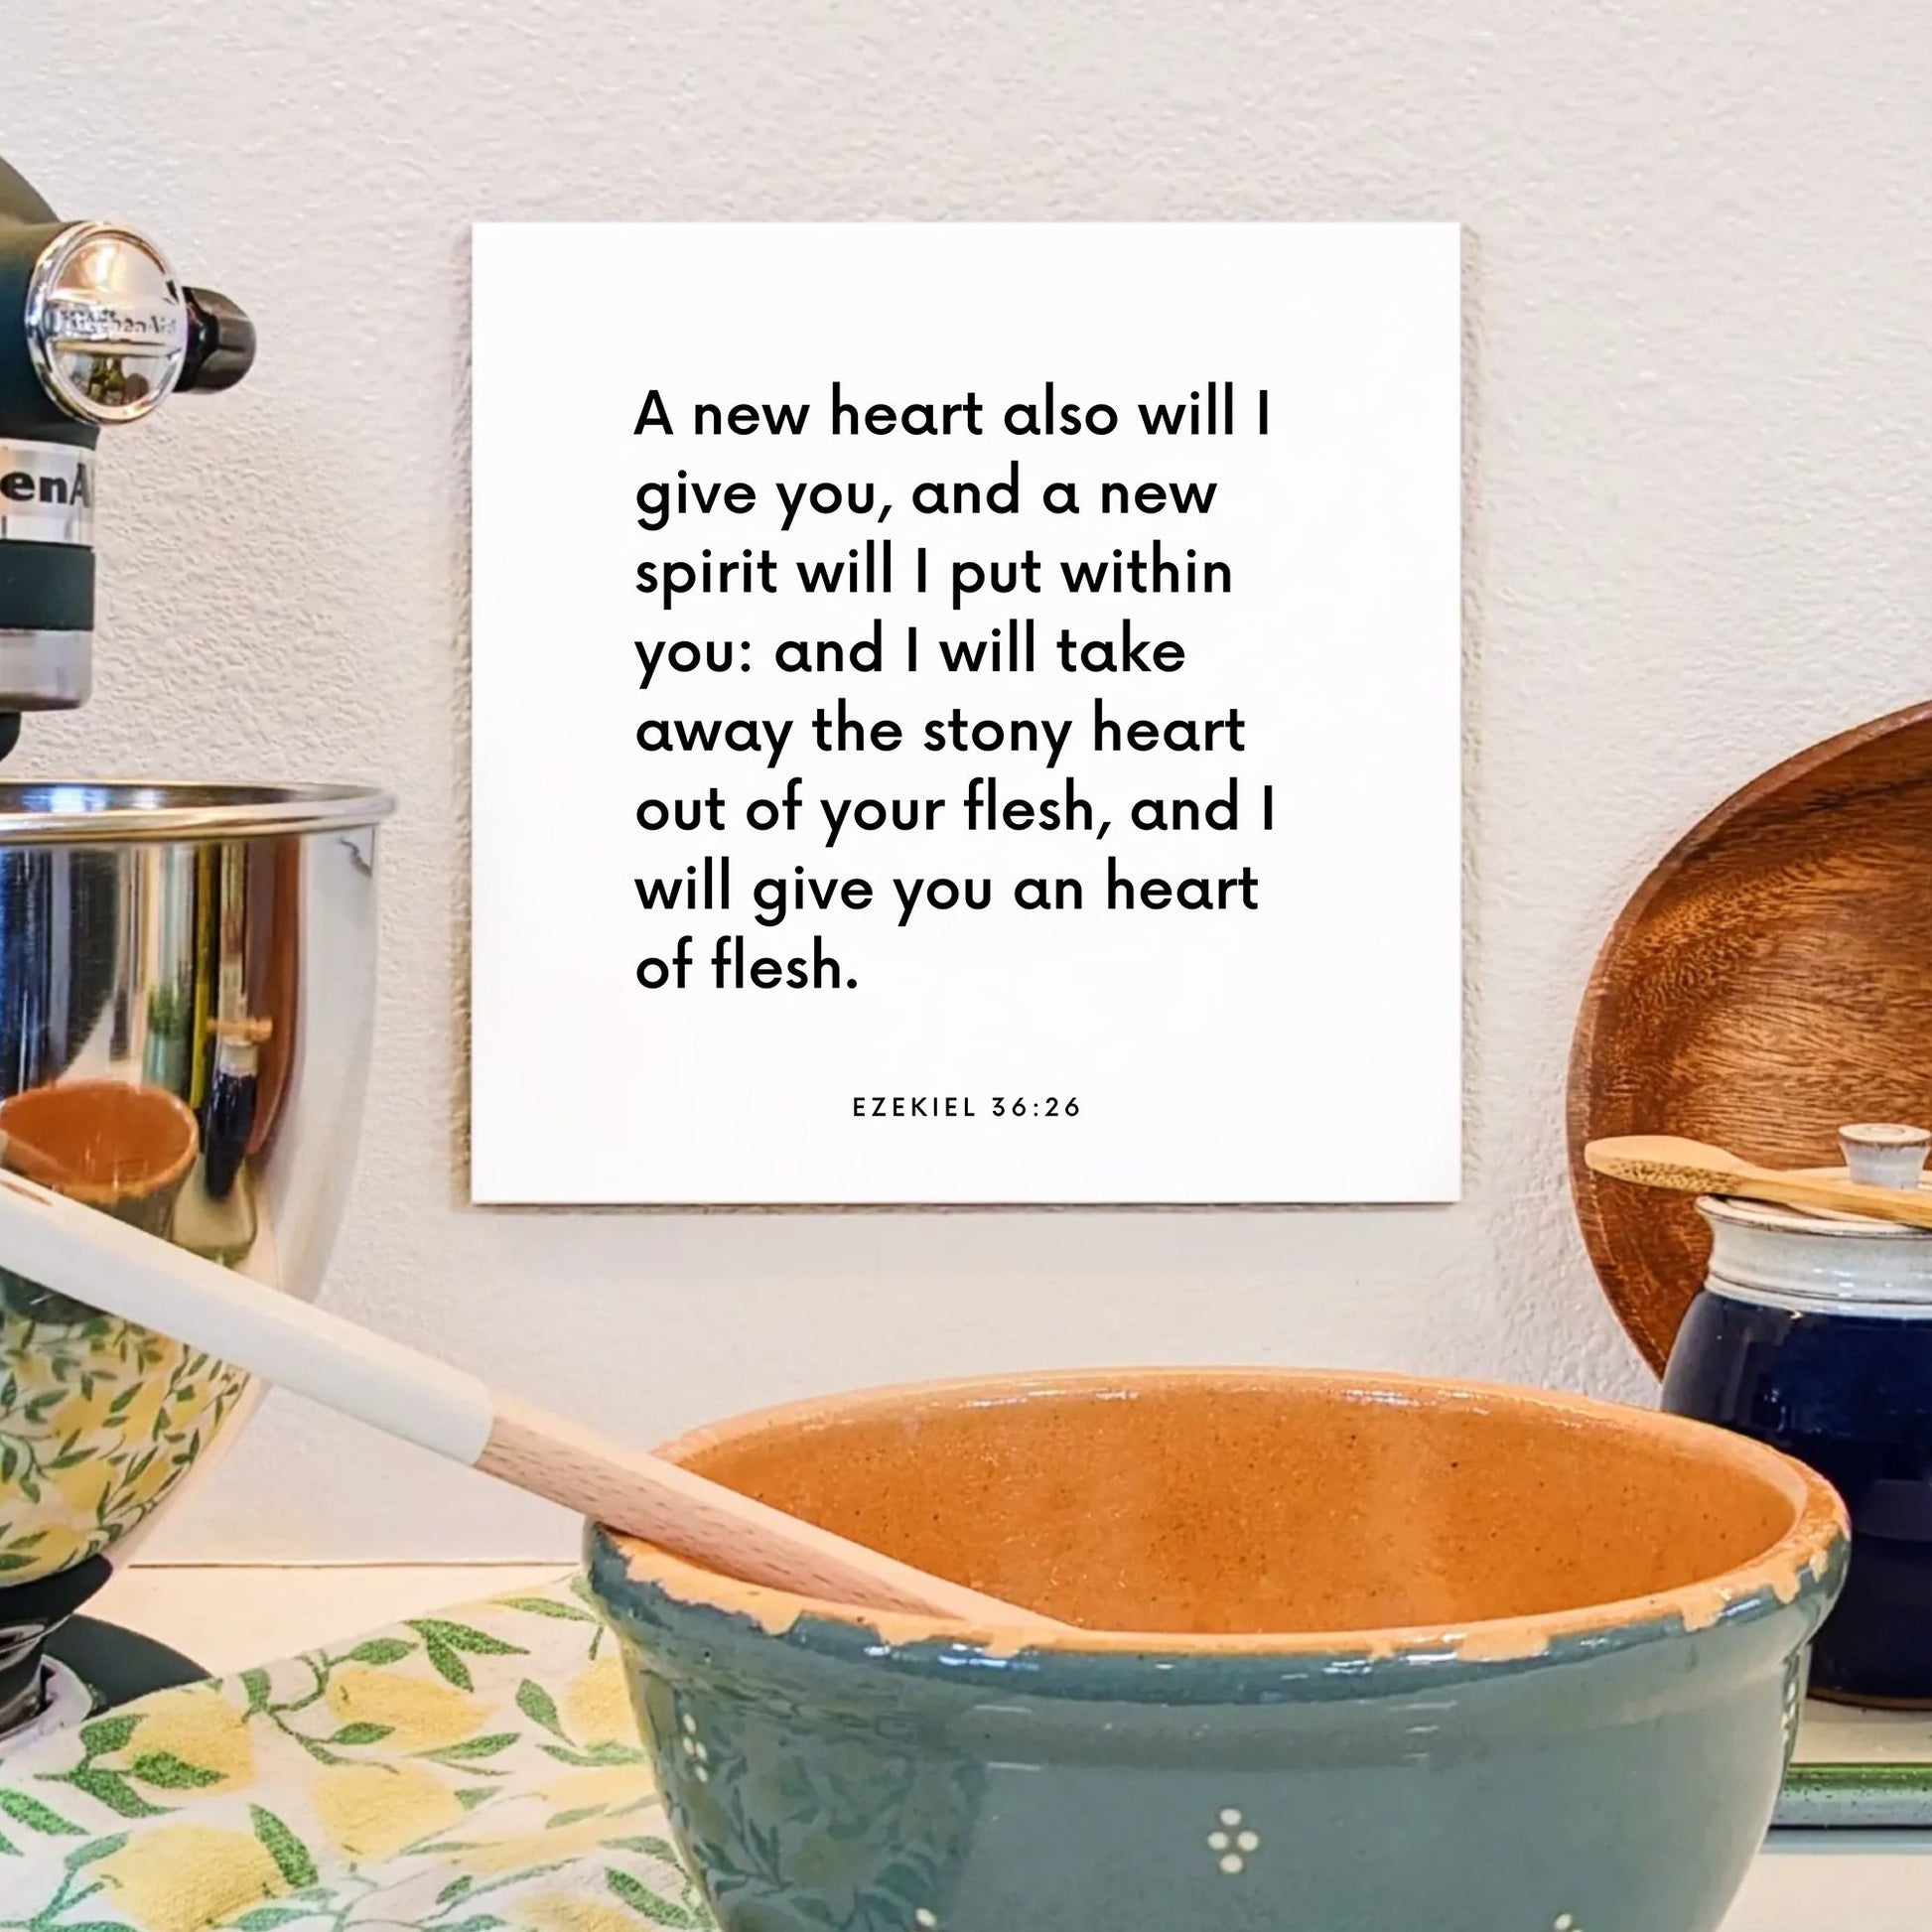 Kitchen mouting of the scripture tile for Ezekiel 36:26 - "A new heart also will I give you, and a new spirit"